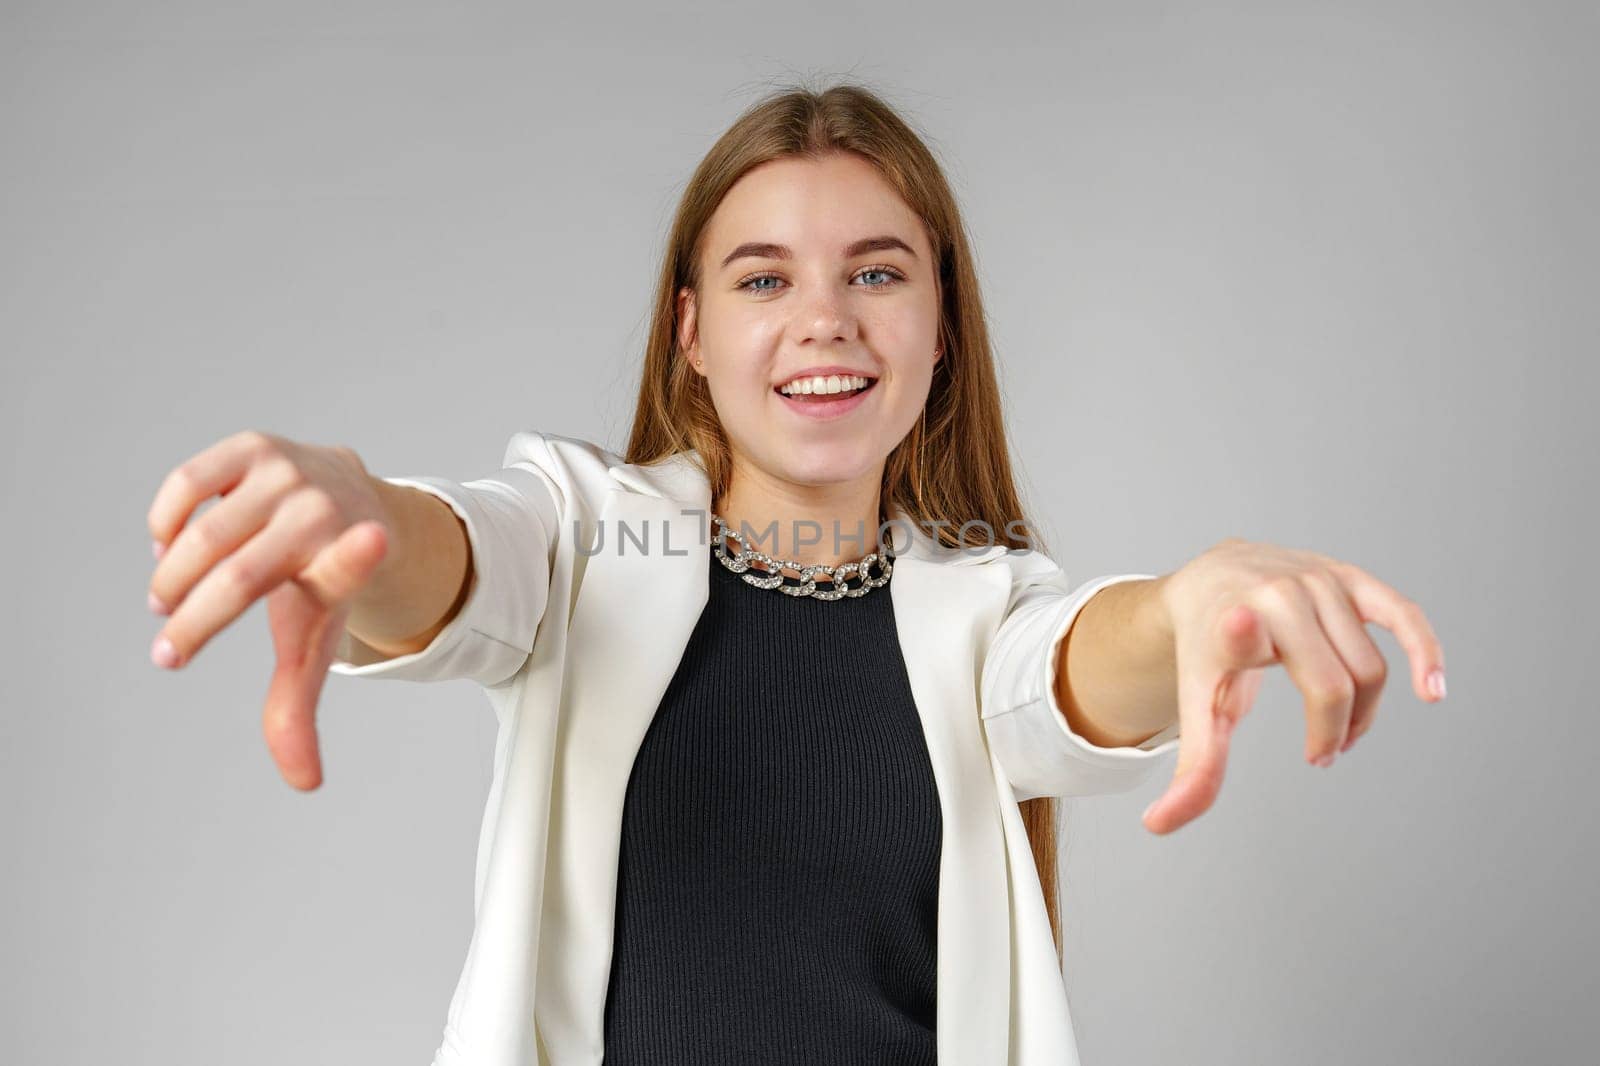 Young Woman in White Blazer Pointing at You Against a Grey Background by Fabrikasimf